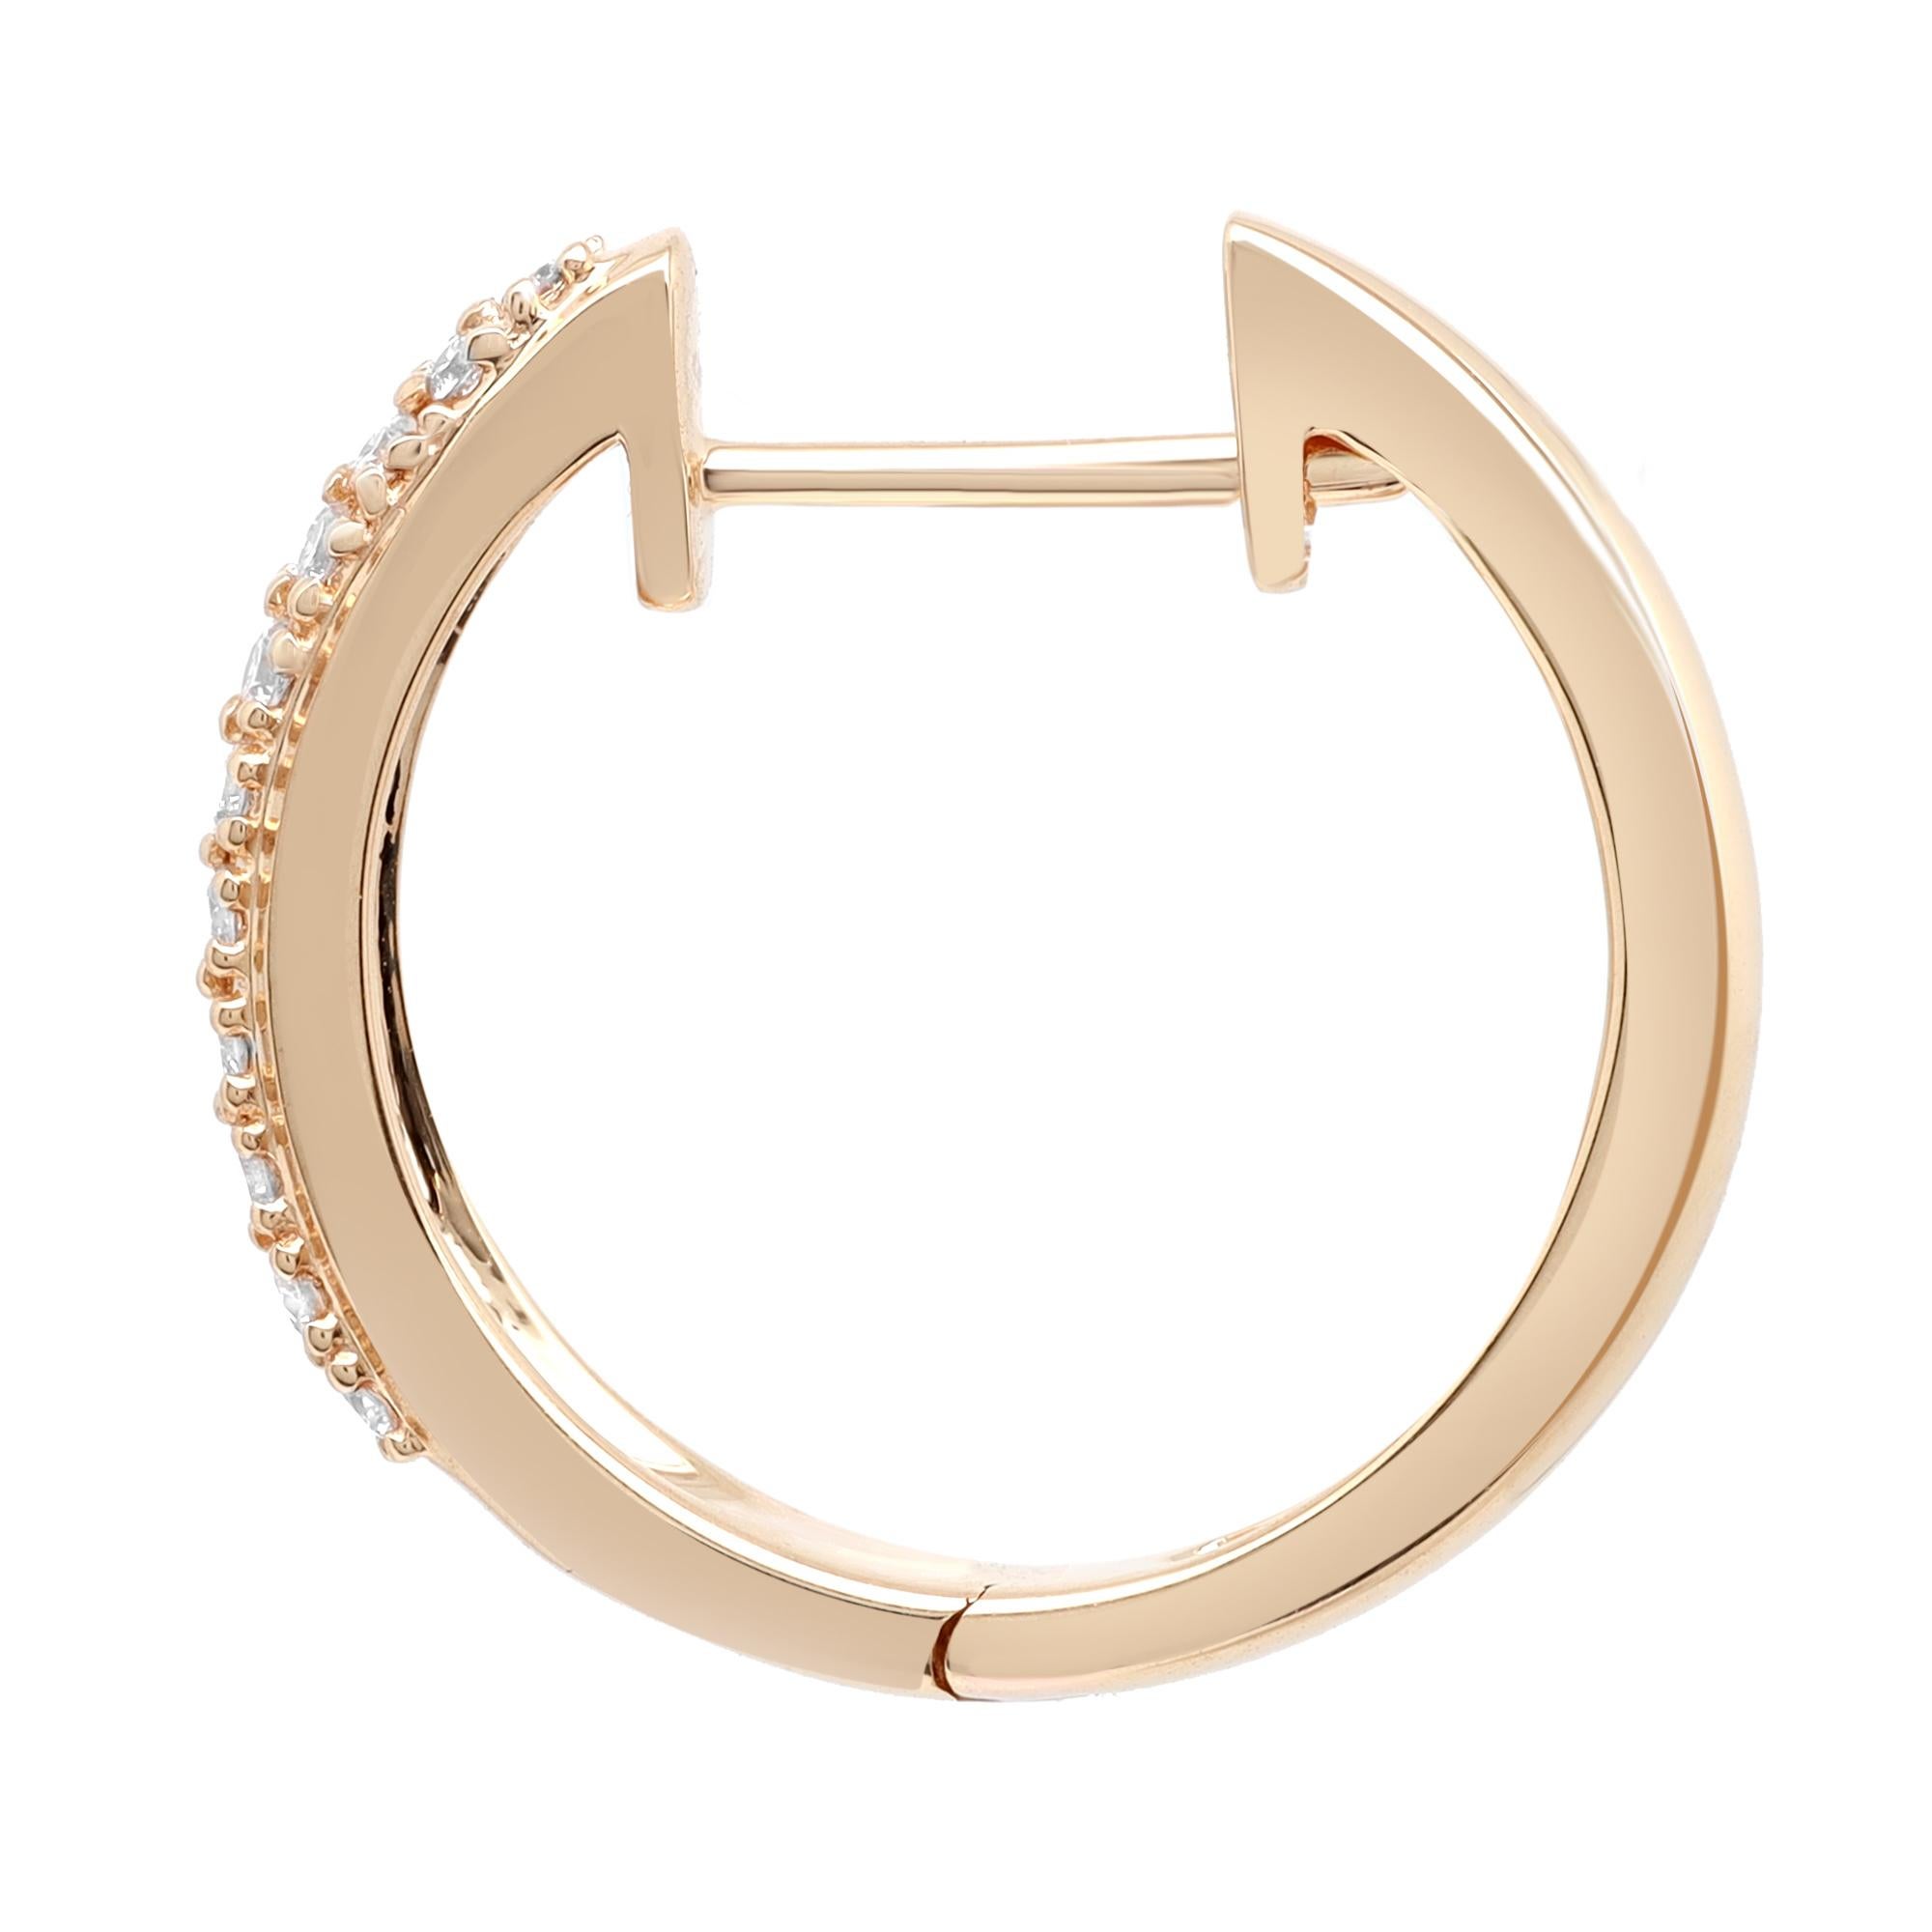 Sleek and classic, a timeless pair of diamond huggie hoop earrings, perfect for a great everyday look. These earrings are crafted in 18K yellow gold and encrusted with prong set round cut diamonds weighing 0.41 carat. Diamond color G-H and clarity